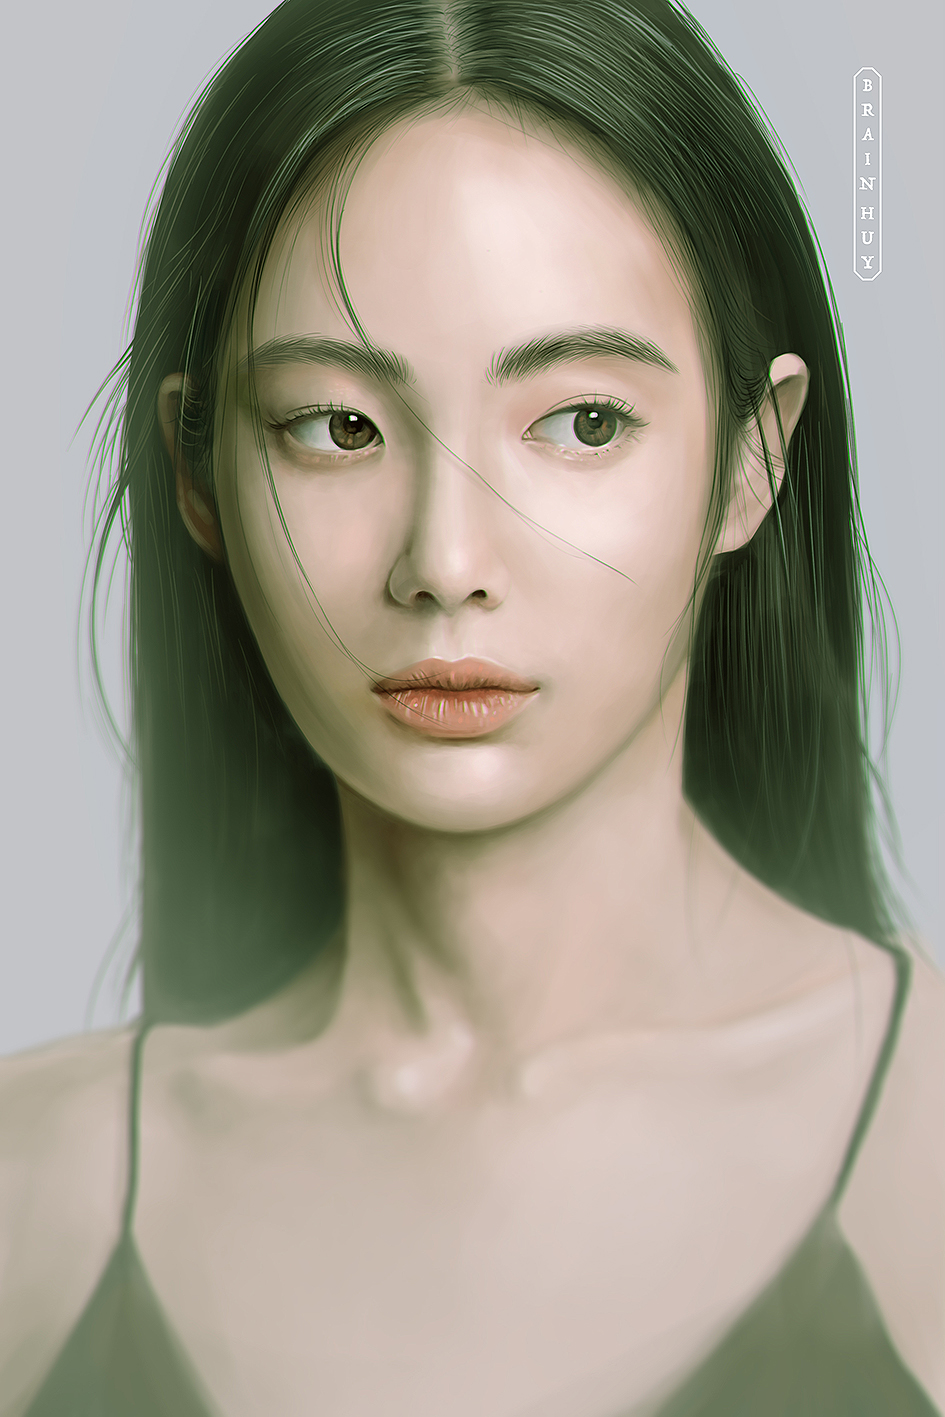 Study Painting ( by Brain Huy )